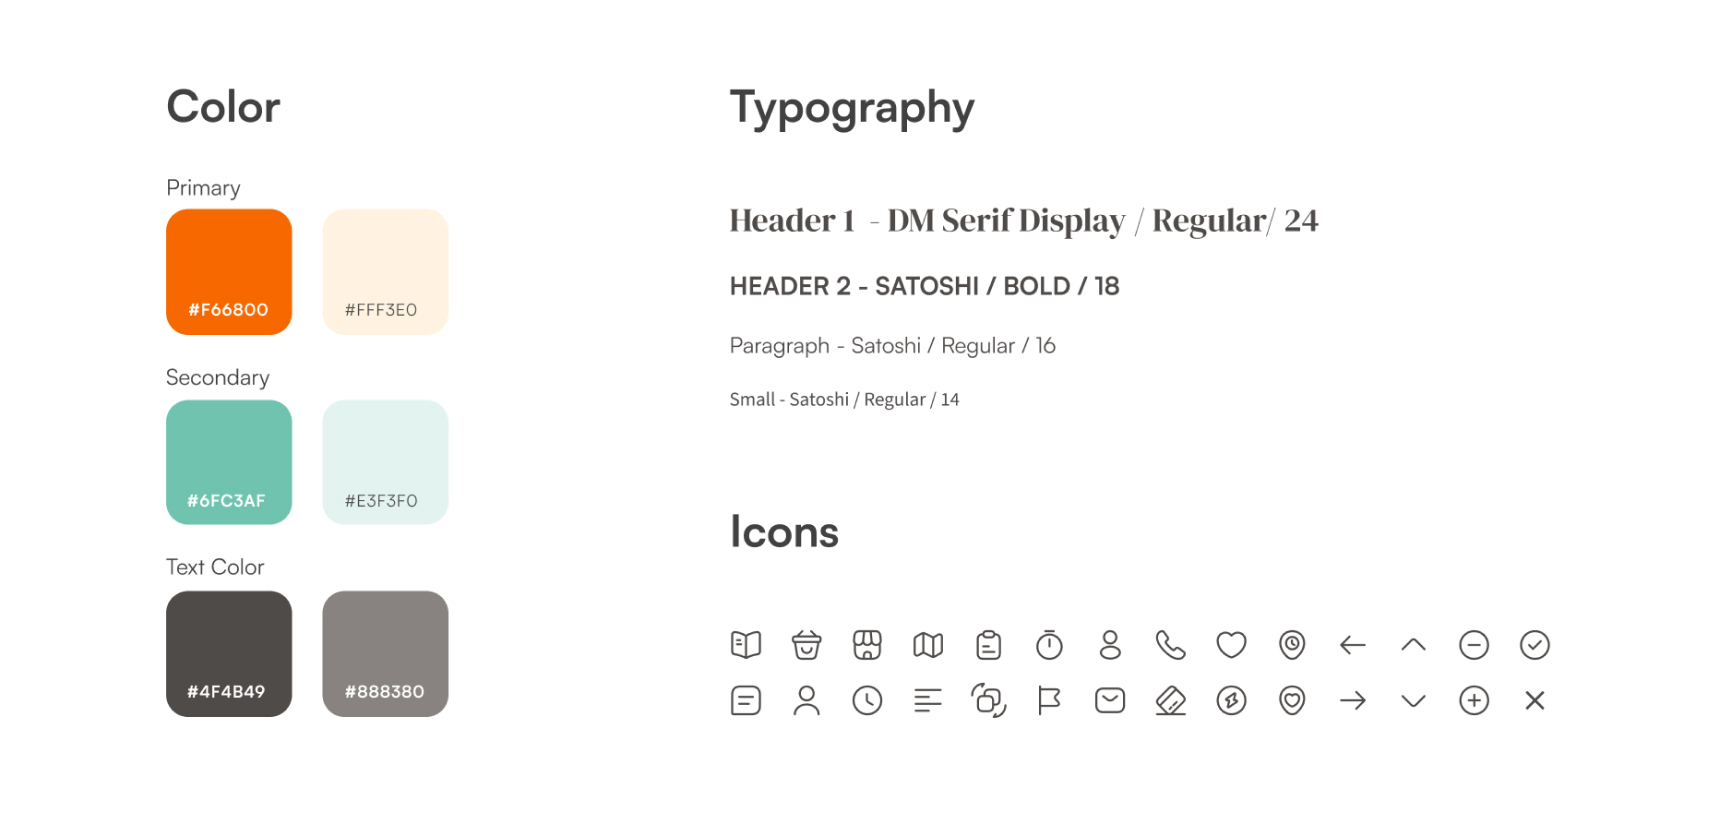 Colors, typefaces, icons